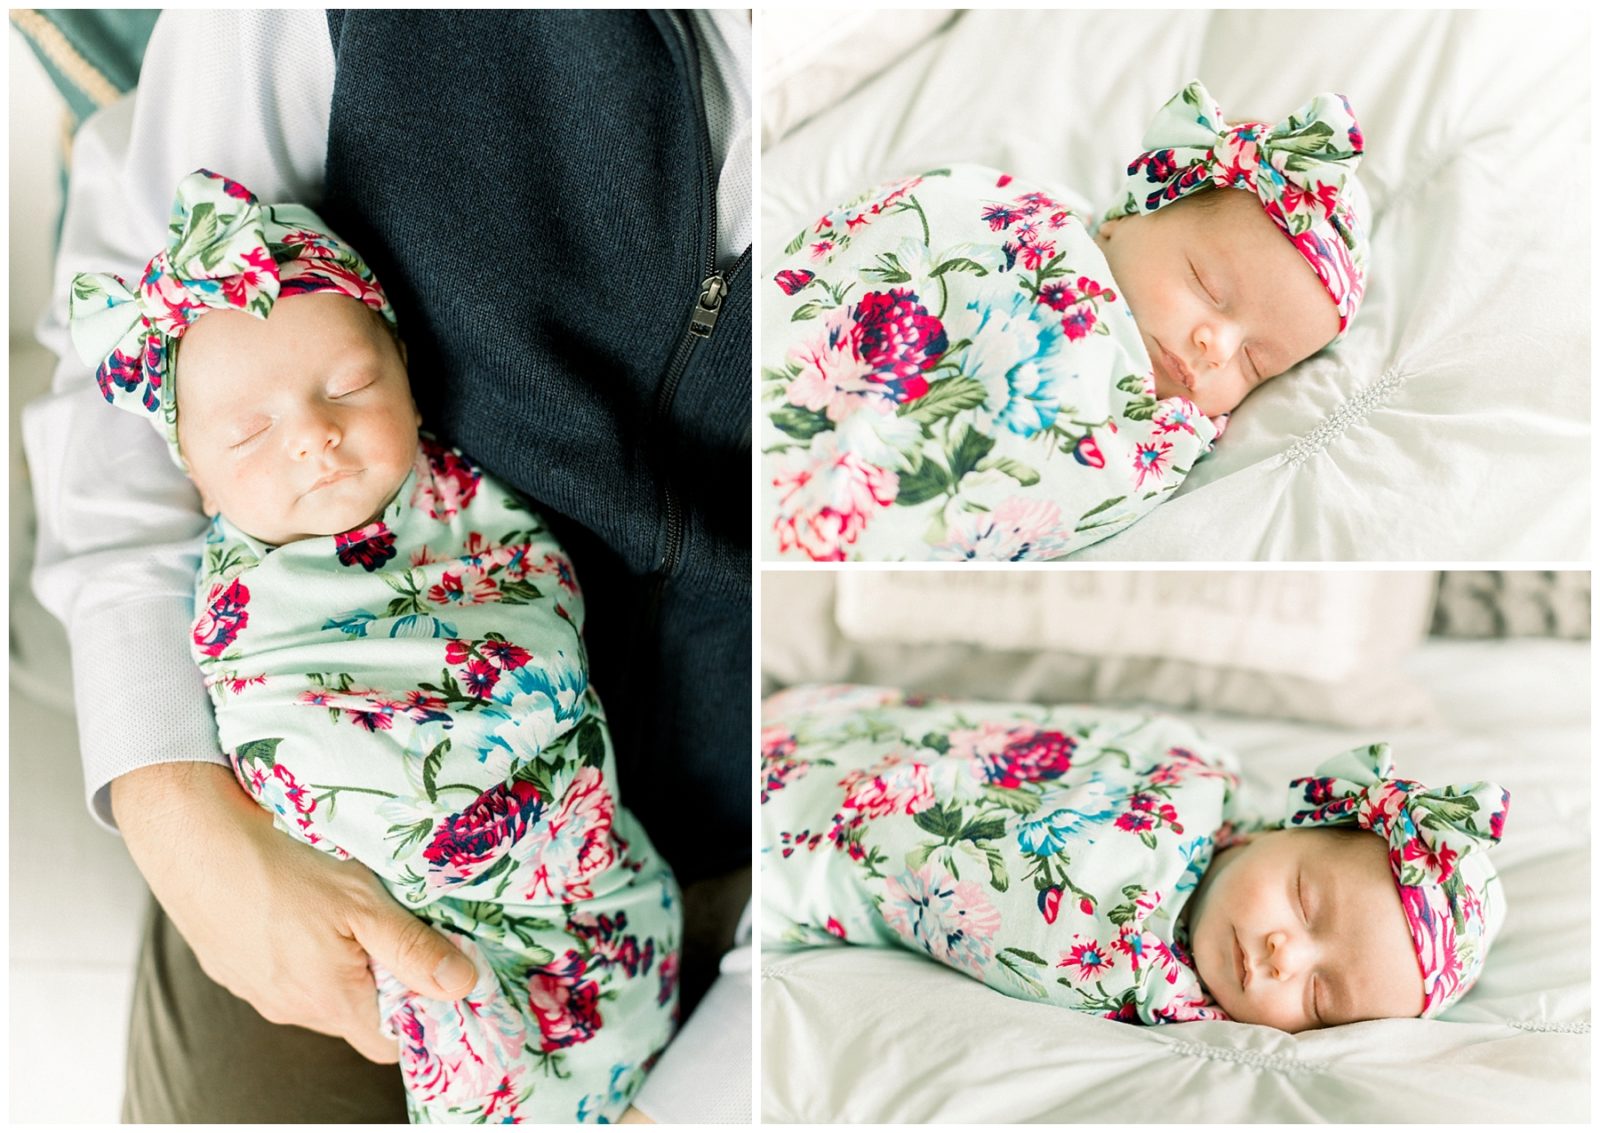 Is an in-home newborn session right for me?